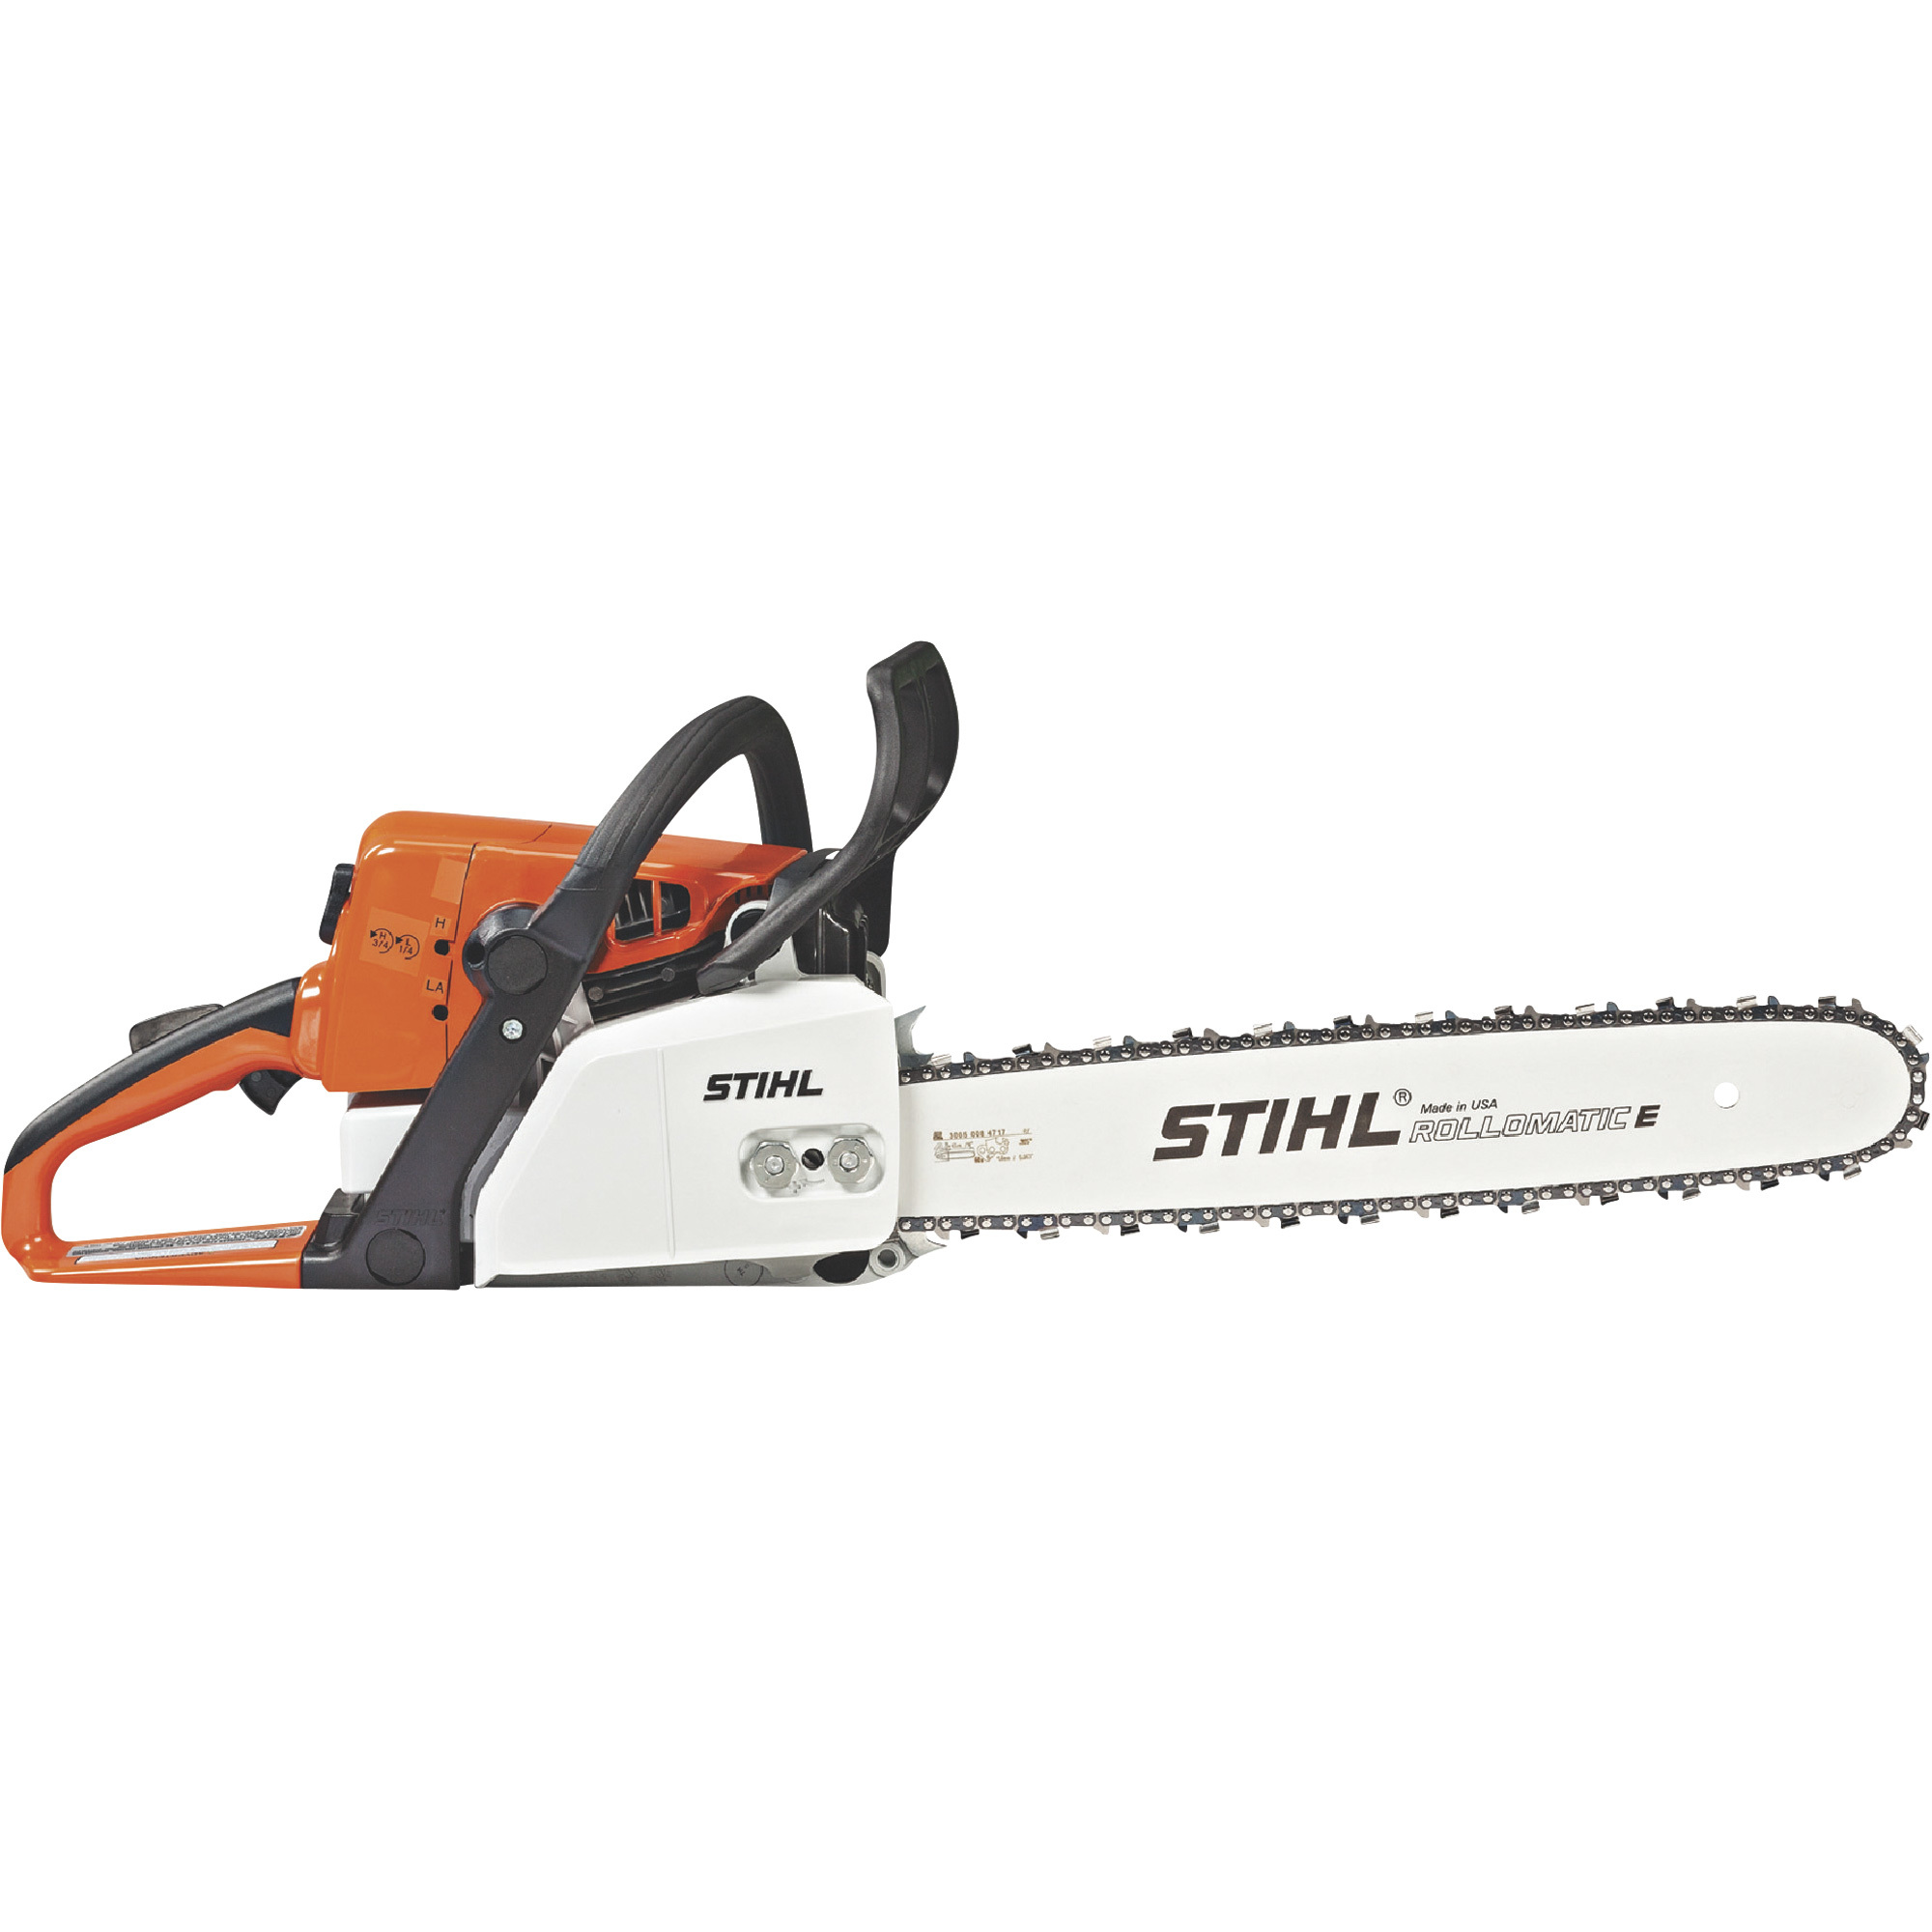 Stihl Gas-Powered Chainsaw 18Inch Bar, 45.4cc Engine, Low Vibration Handle, Electronic Ignition and Toolless Caps, Model MS 250